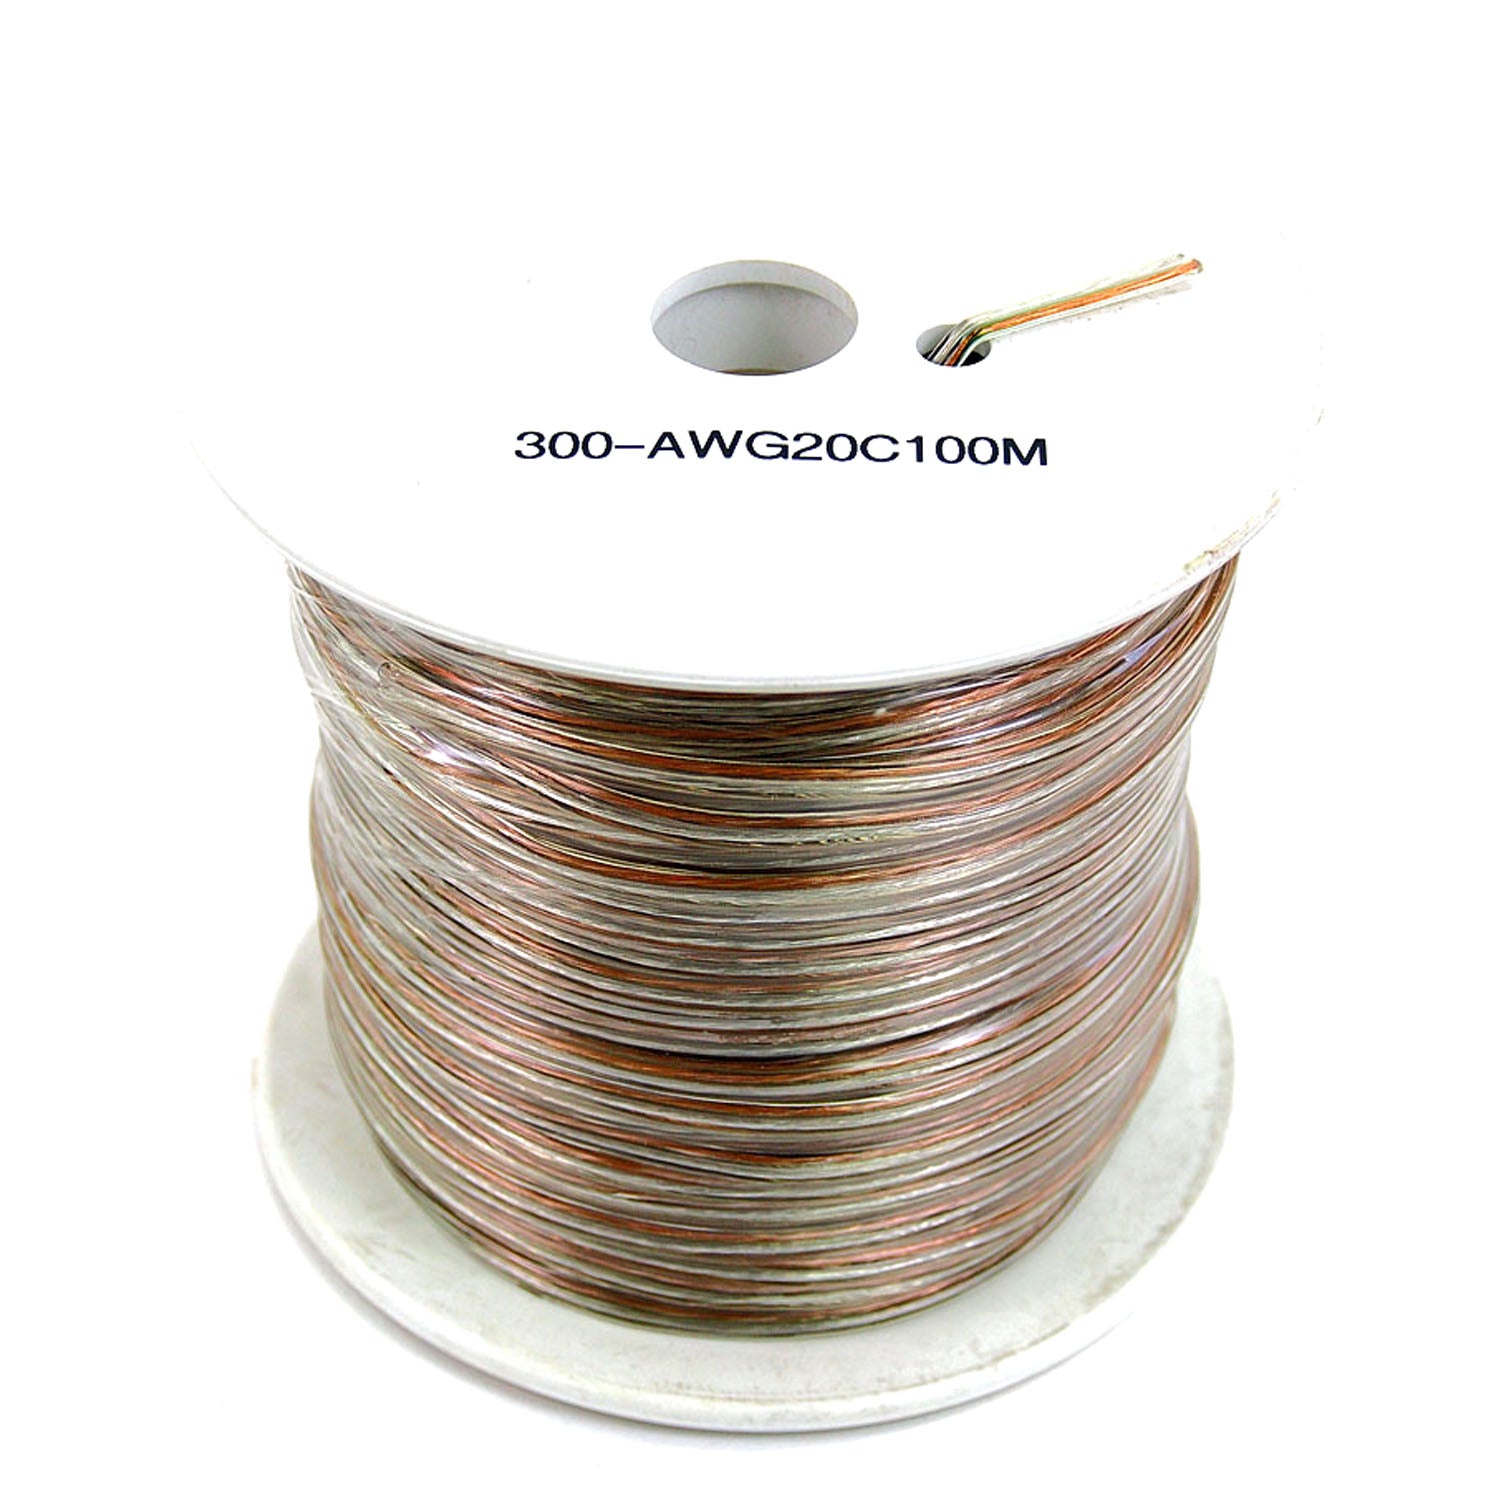 300-AWG20C100M 300FT 20GA 2C Clear Spek Cable